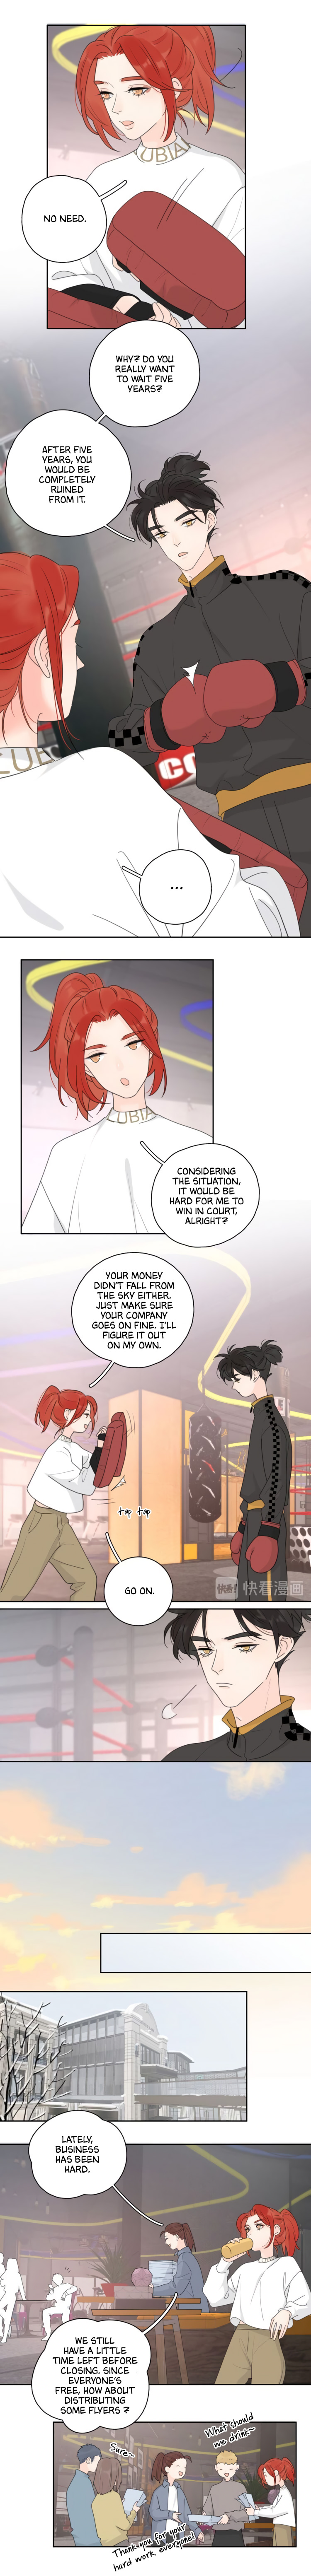 The Looks Of Love: The Heart Has Its Reasons - Page 2